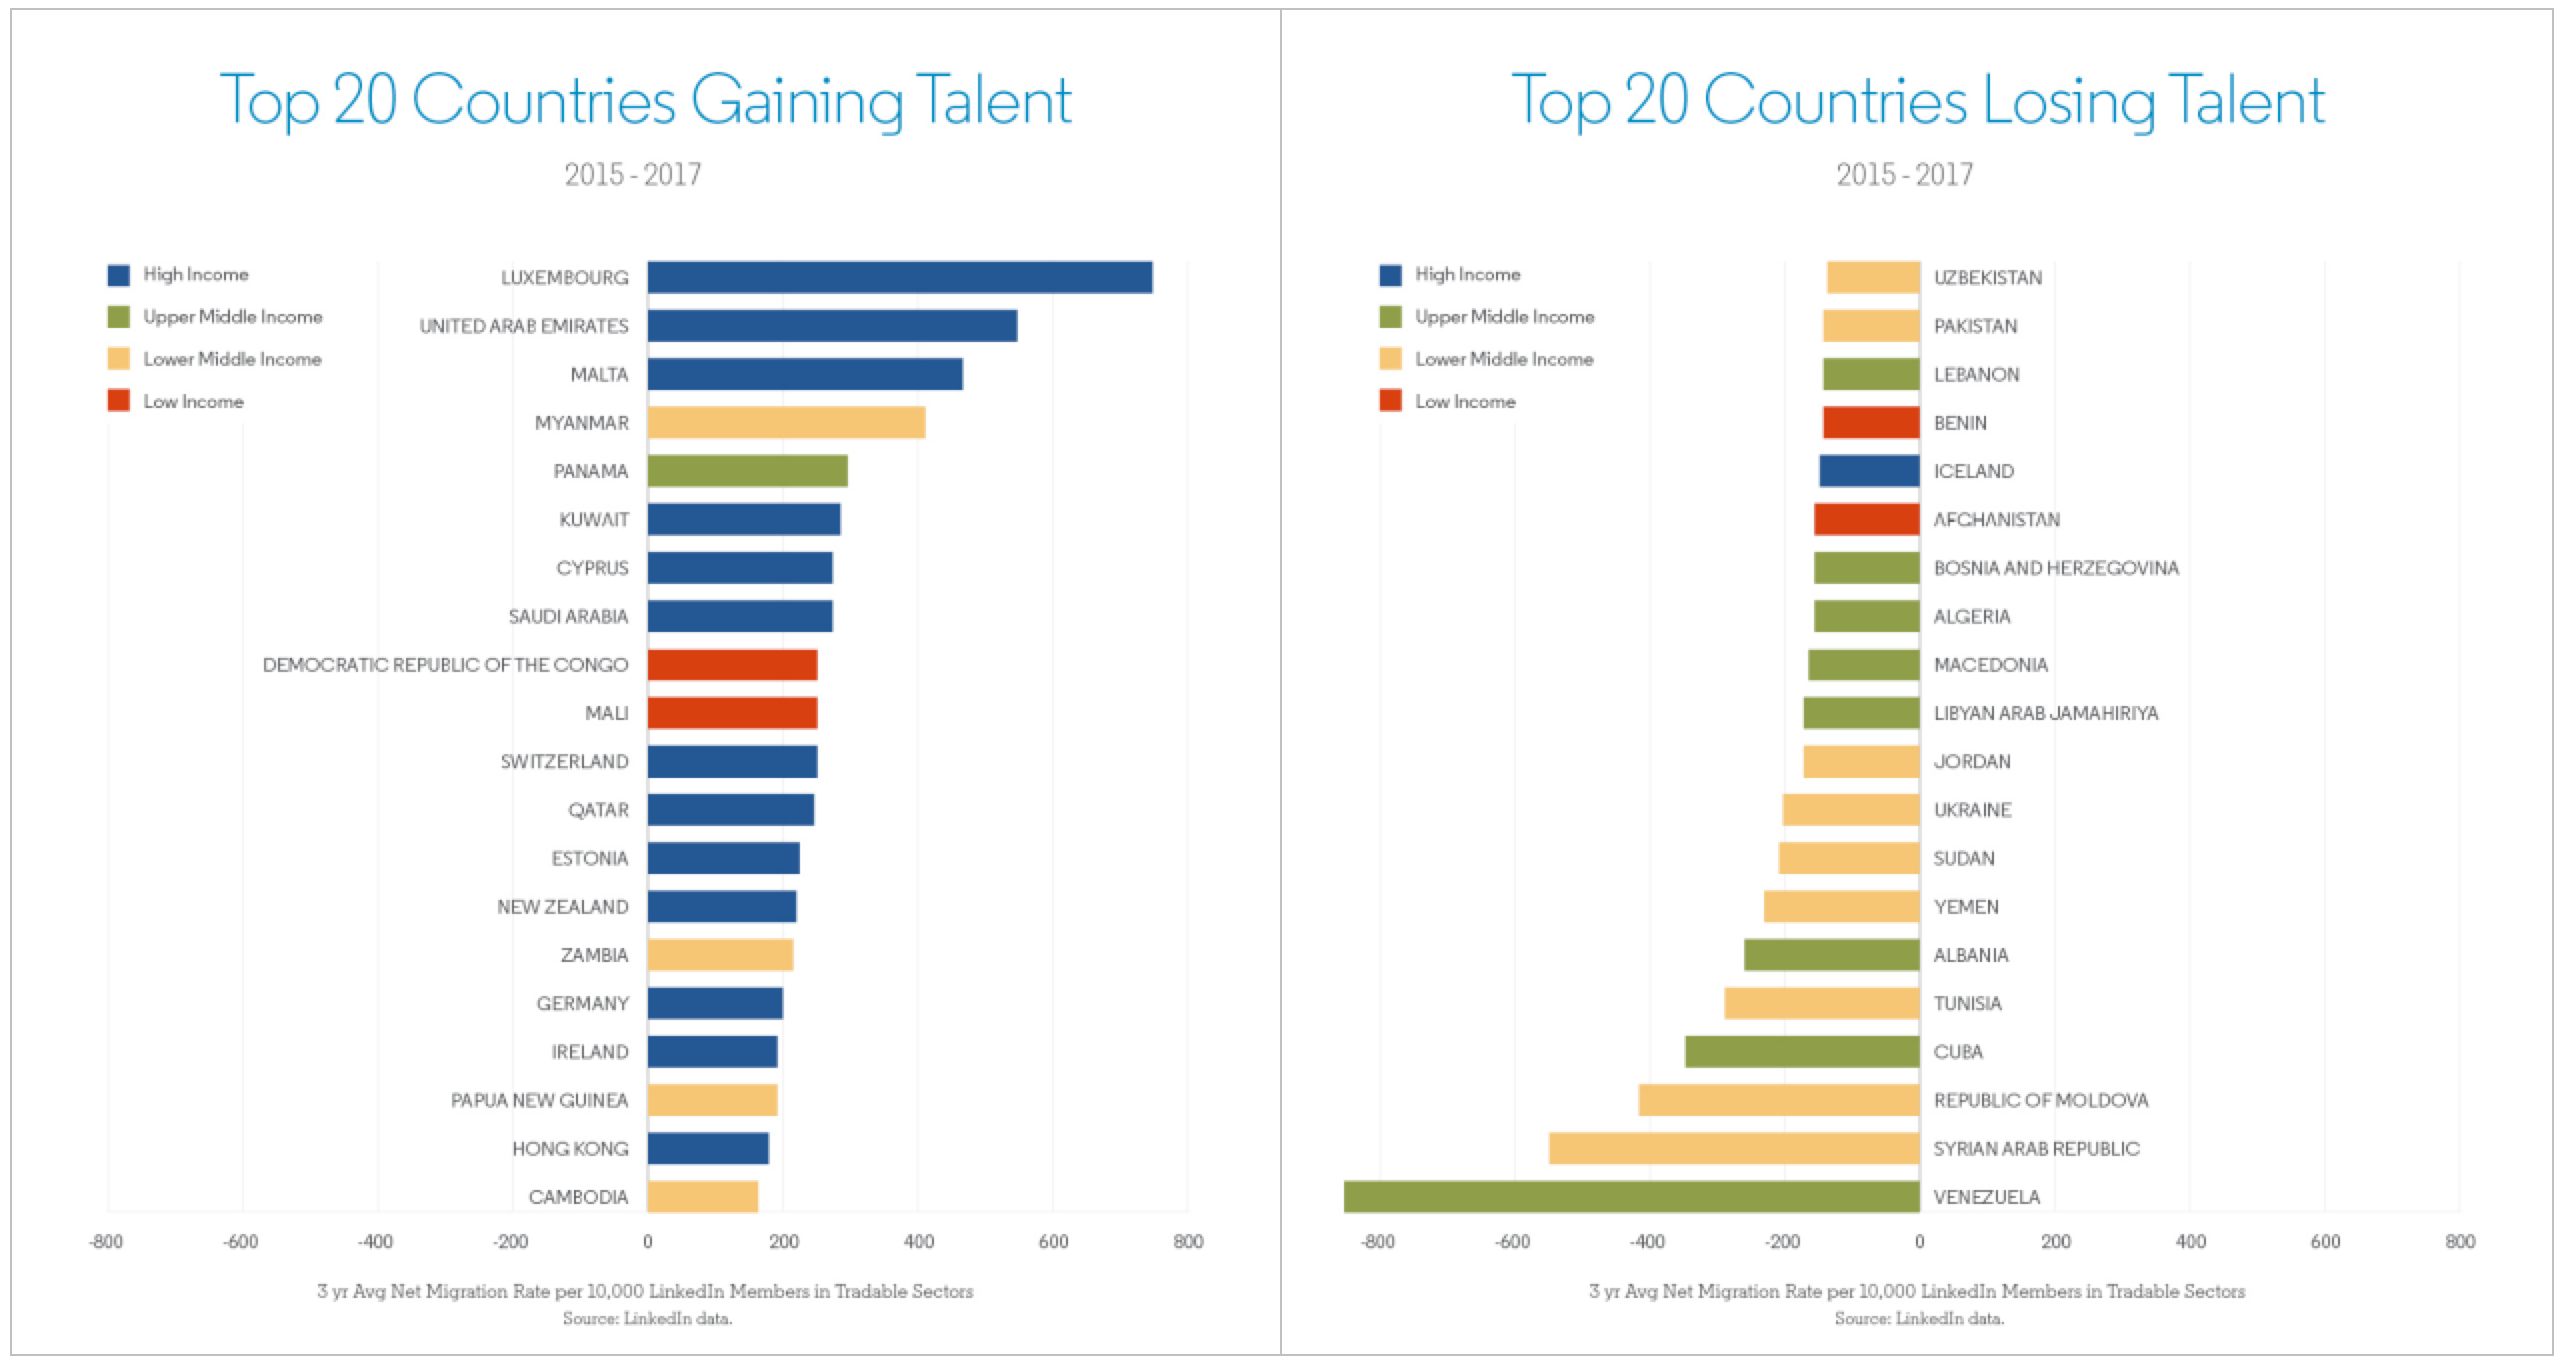 Top 20 Countries Losing Talent